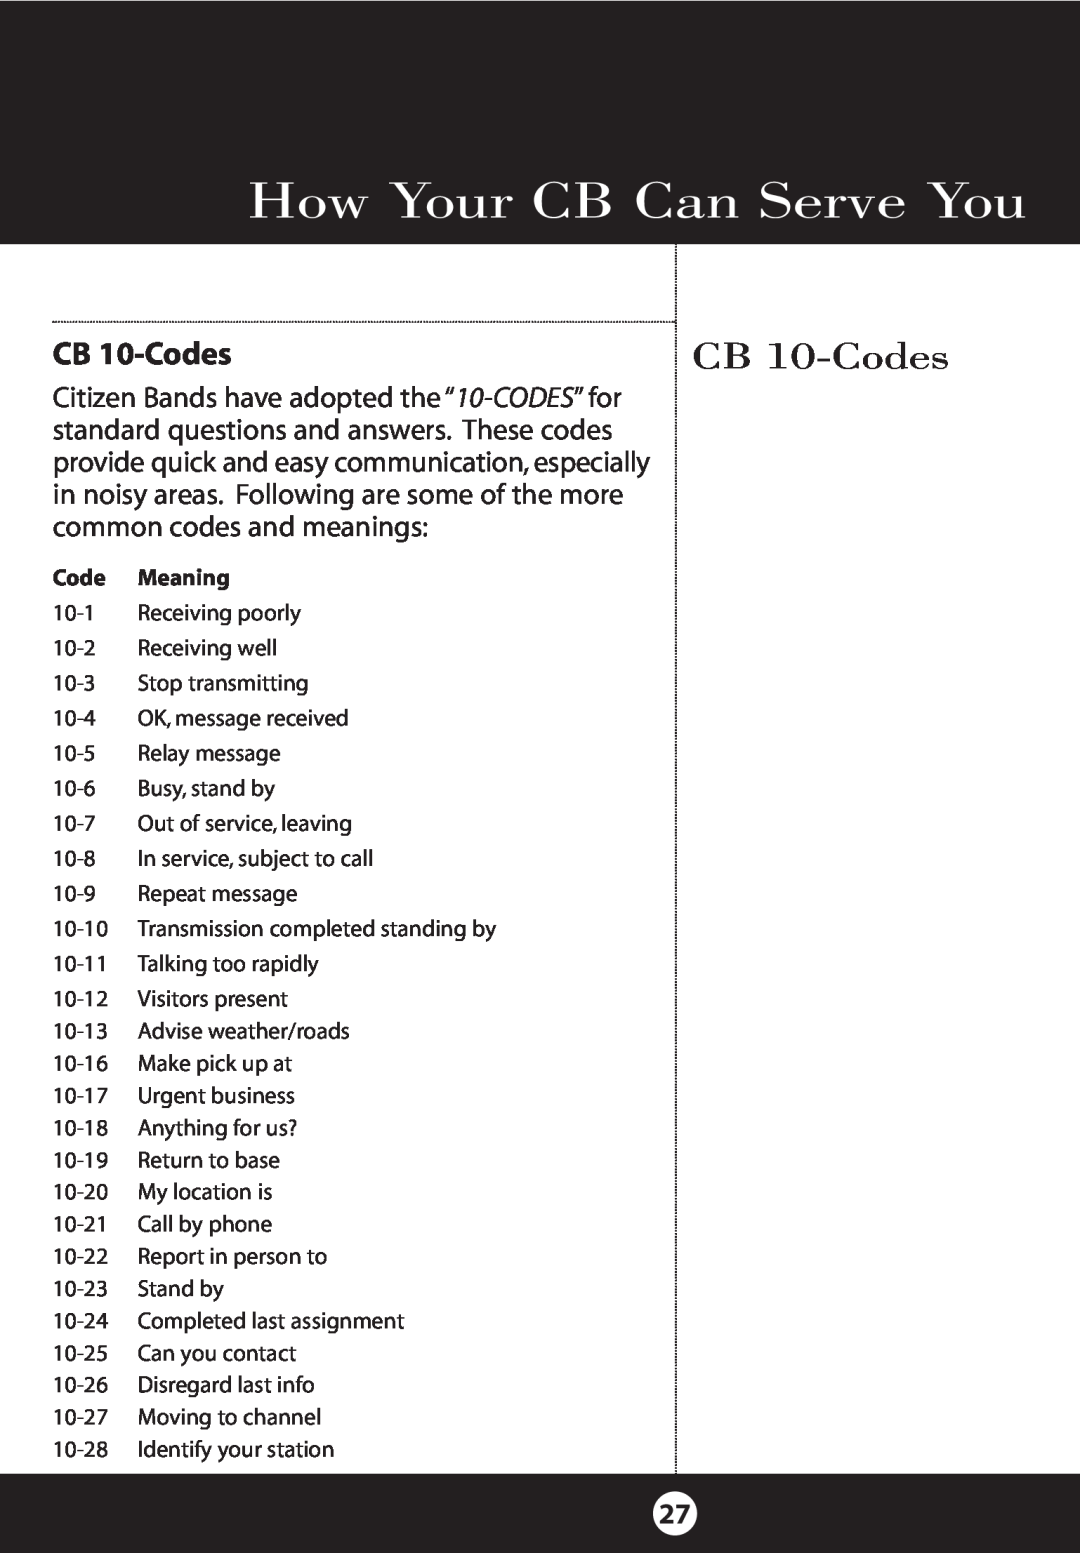 Cobra Electronics 25 NW specifications CB 10-Codes, How Your CB Can Serve You 